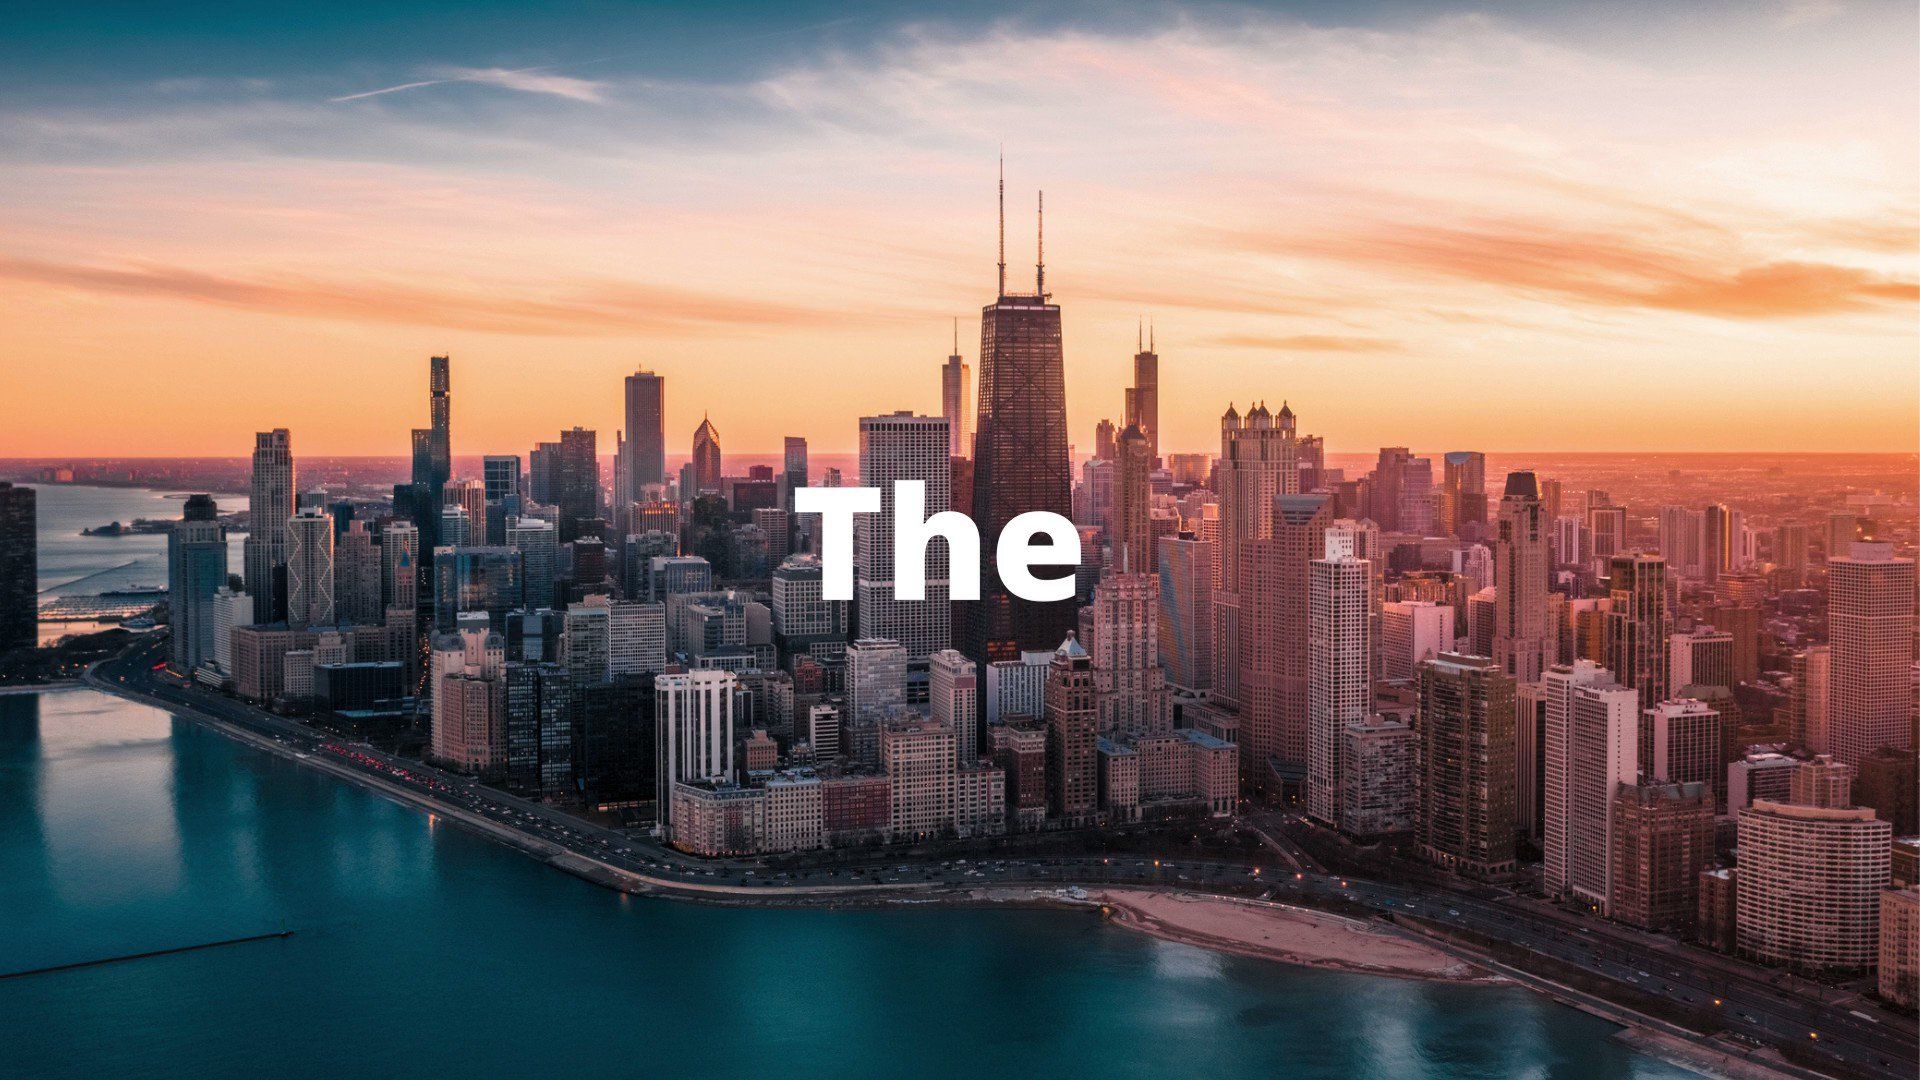 The city of chicago is shown in this photo - Chicago